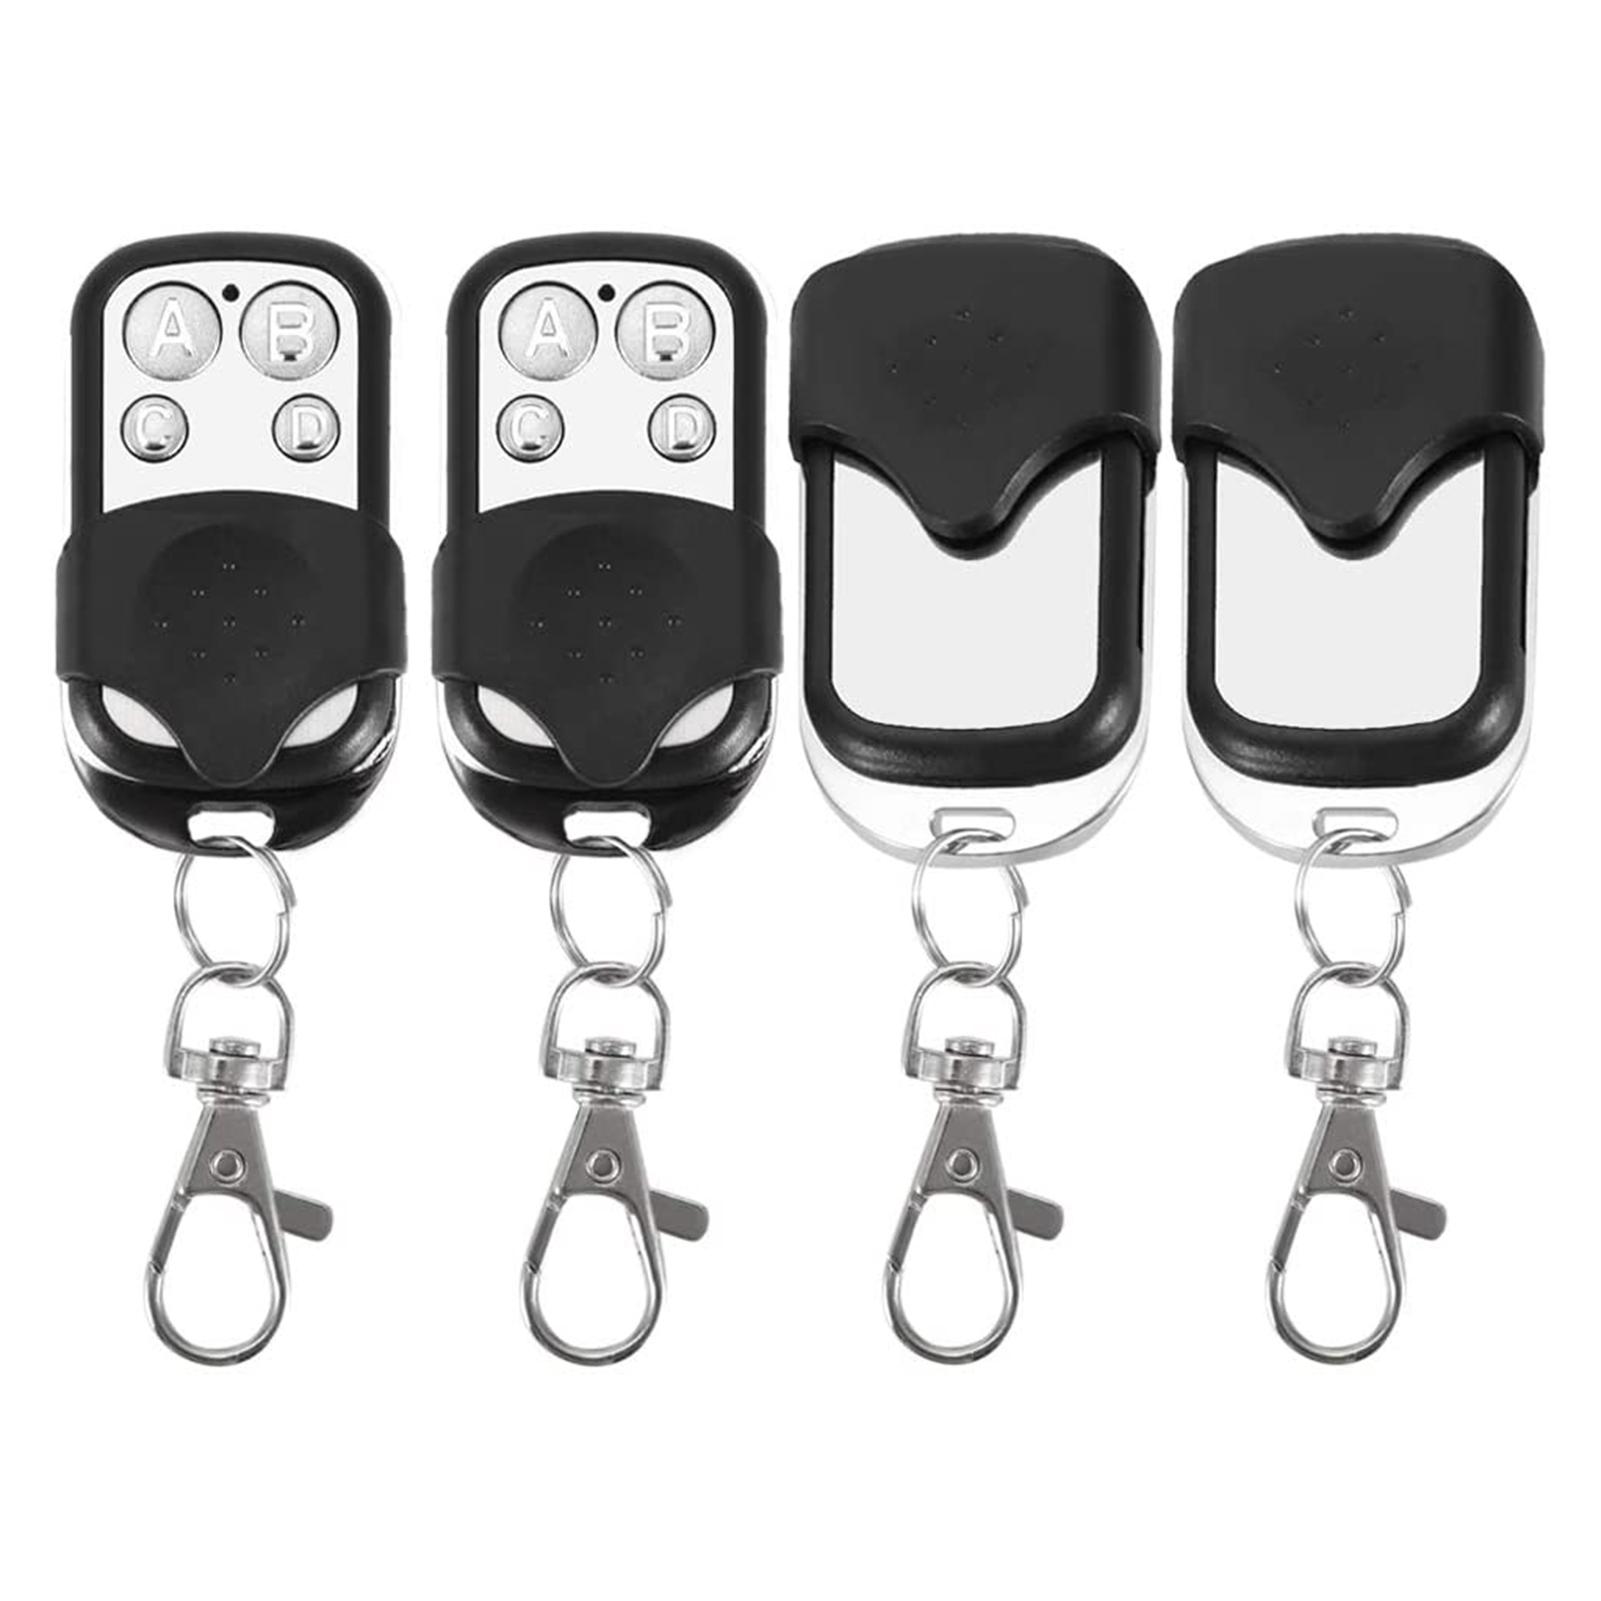 Hình ảnh 4Pcs Remote Control Key Fobs One-click Theft Against 4 Buttons Simple Pairing 433MHz for Car Garage Door Gate Skylight